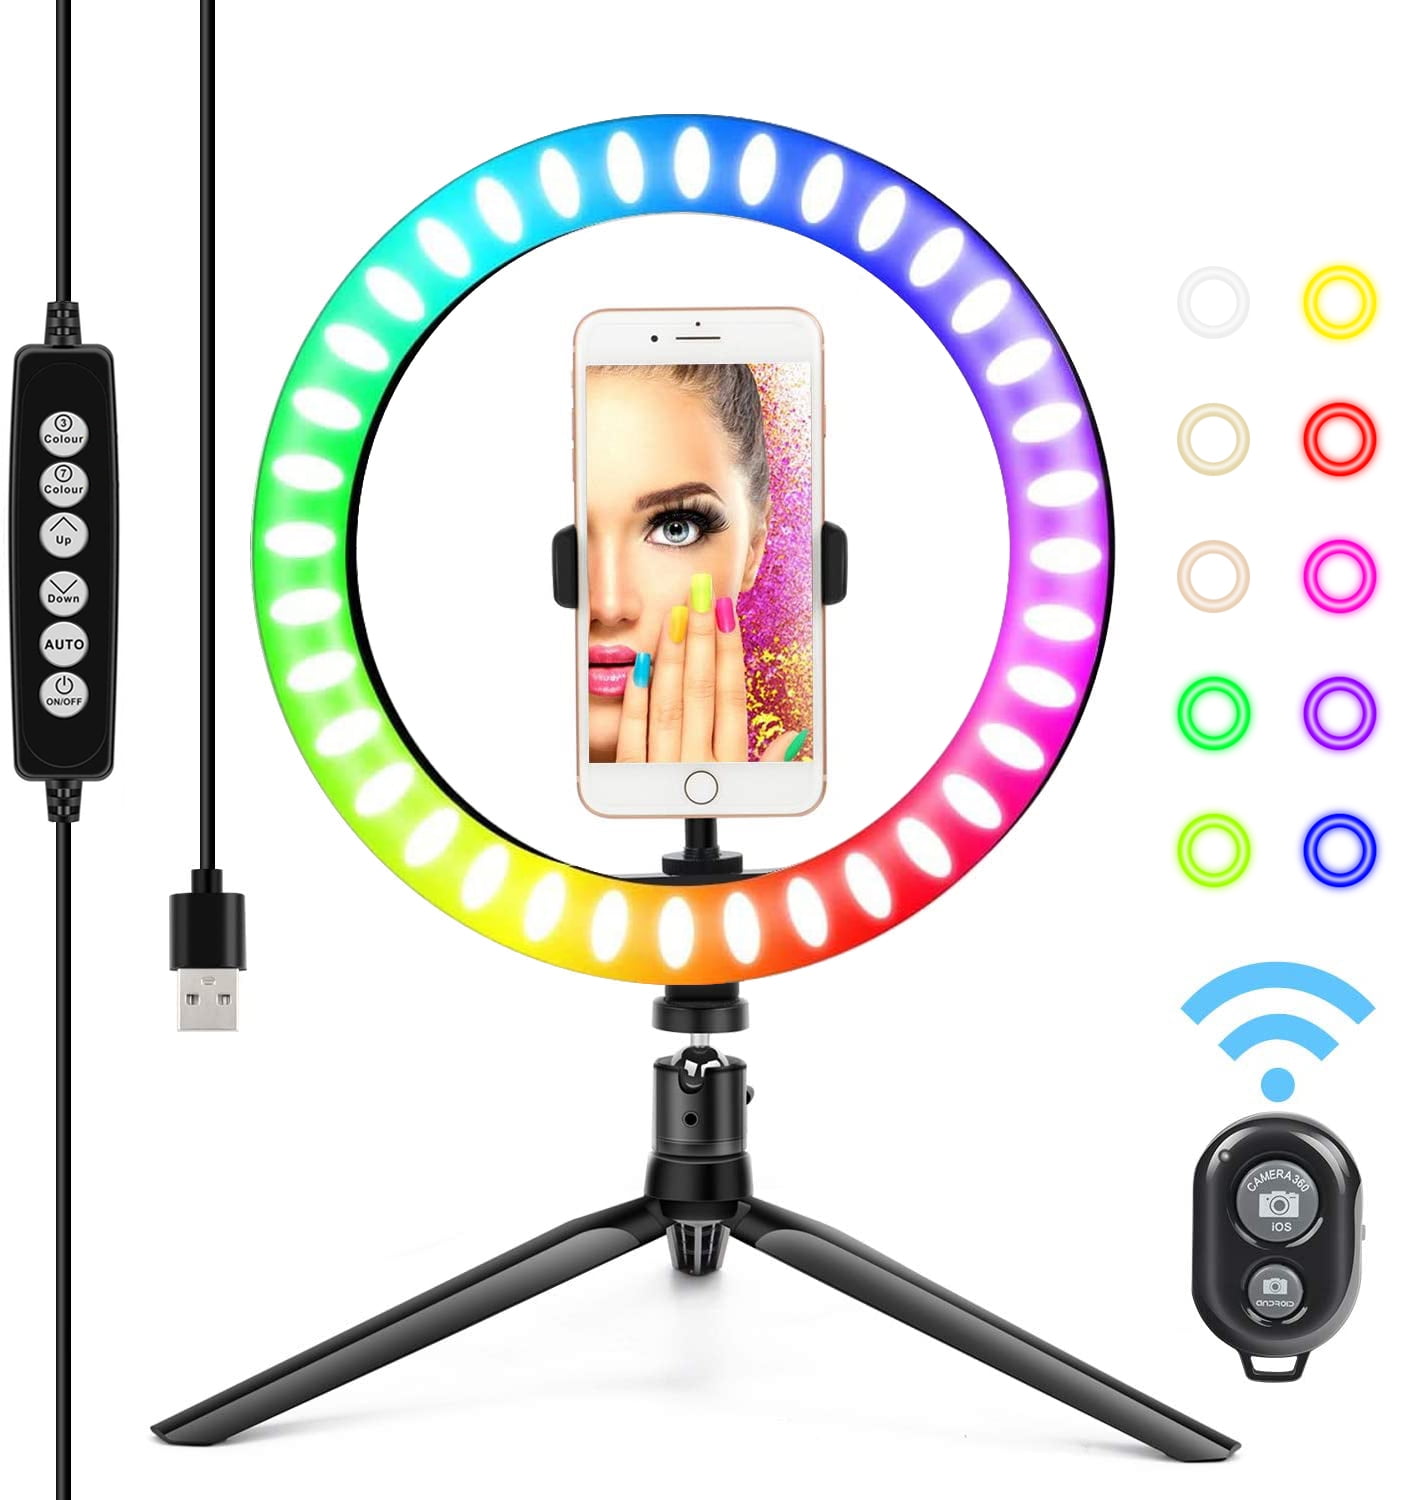 ldab 12 Desktop Selfie Ring Light with Tripod Stand/Cell Phone Holder LED Beauty Lamp for Vlog/Live Stream/Make Up/YouTube 3 Light Modes/10 Brightness Compatible with iPhone/Android